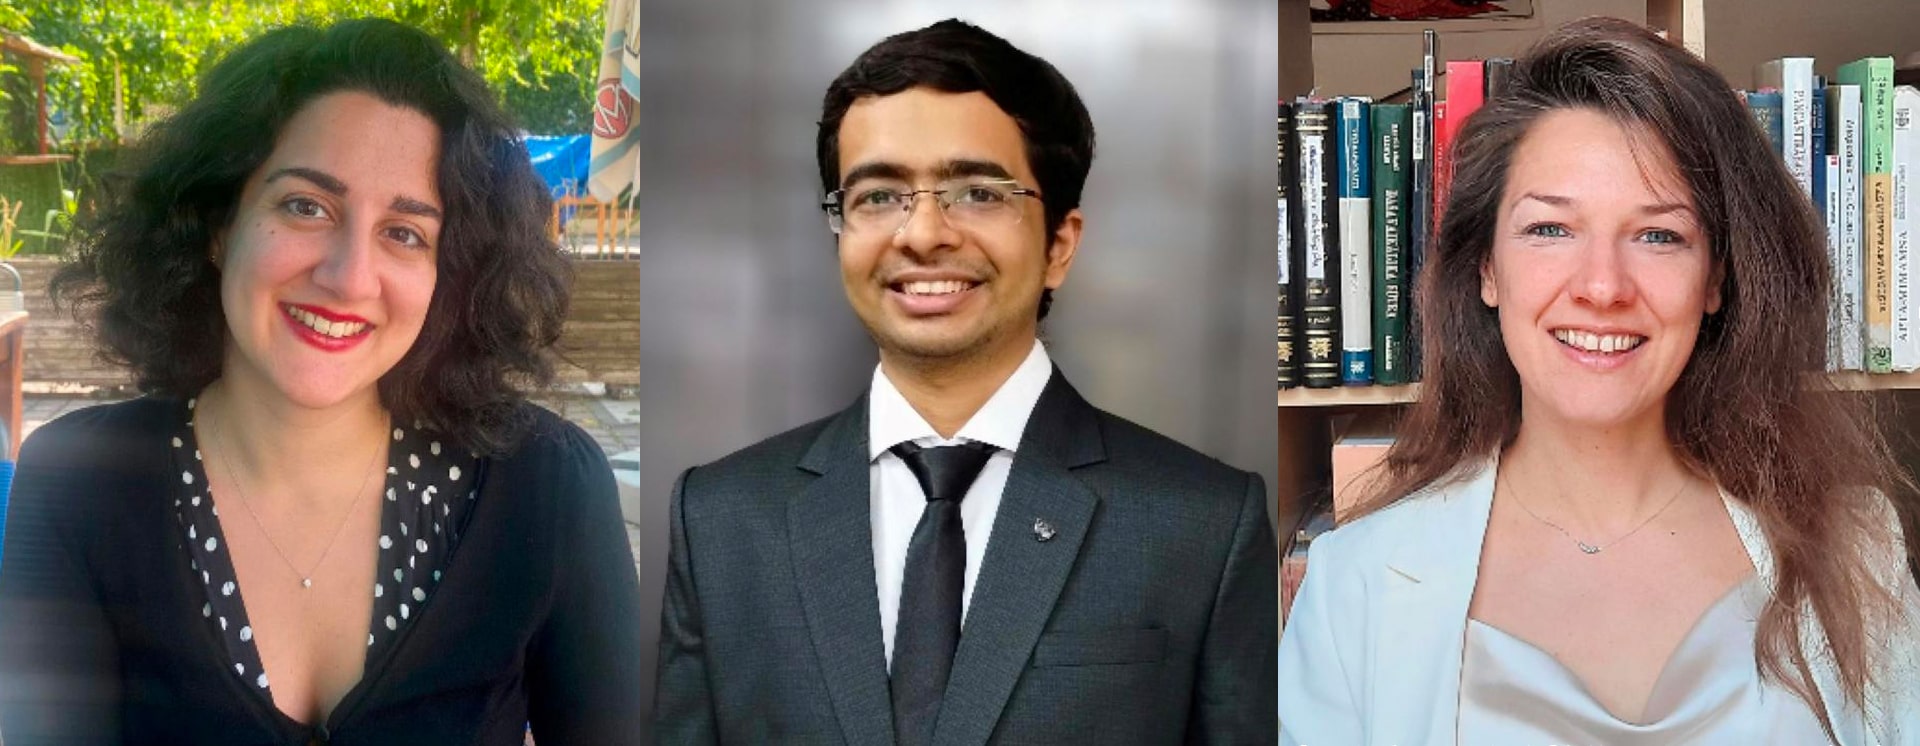  The three appointees (from left to right): Dr Areti Theofilopoulou, Jinesh Sheth, and Dr Marie-Hélène Gorisse